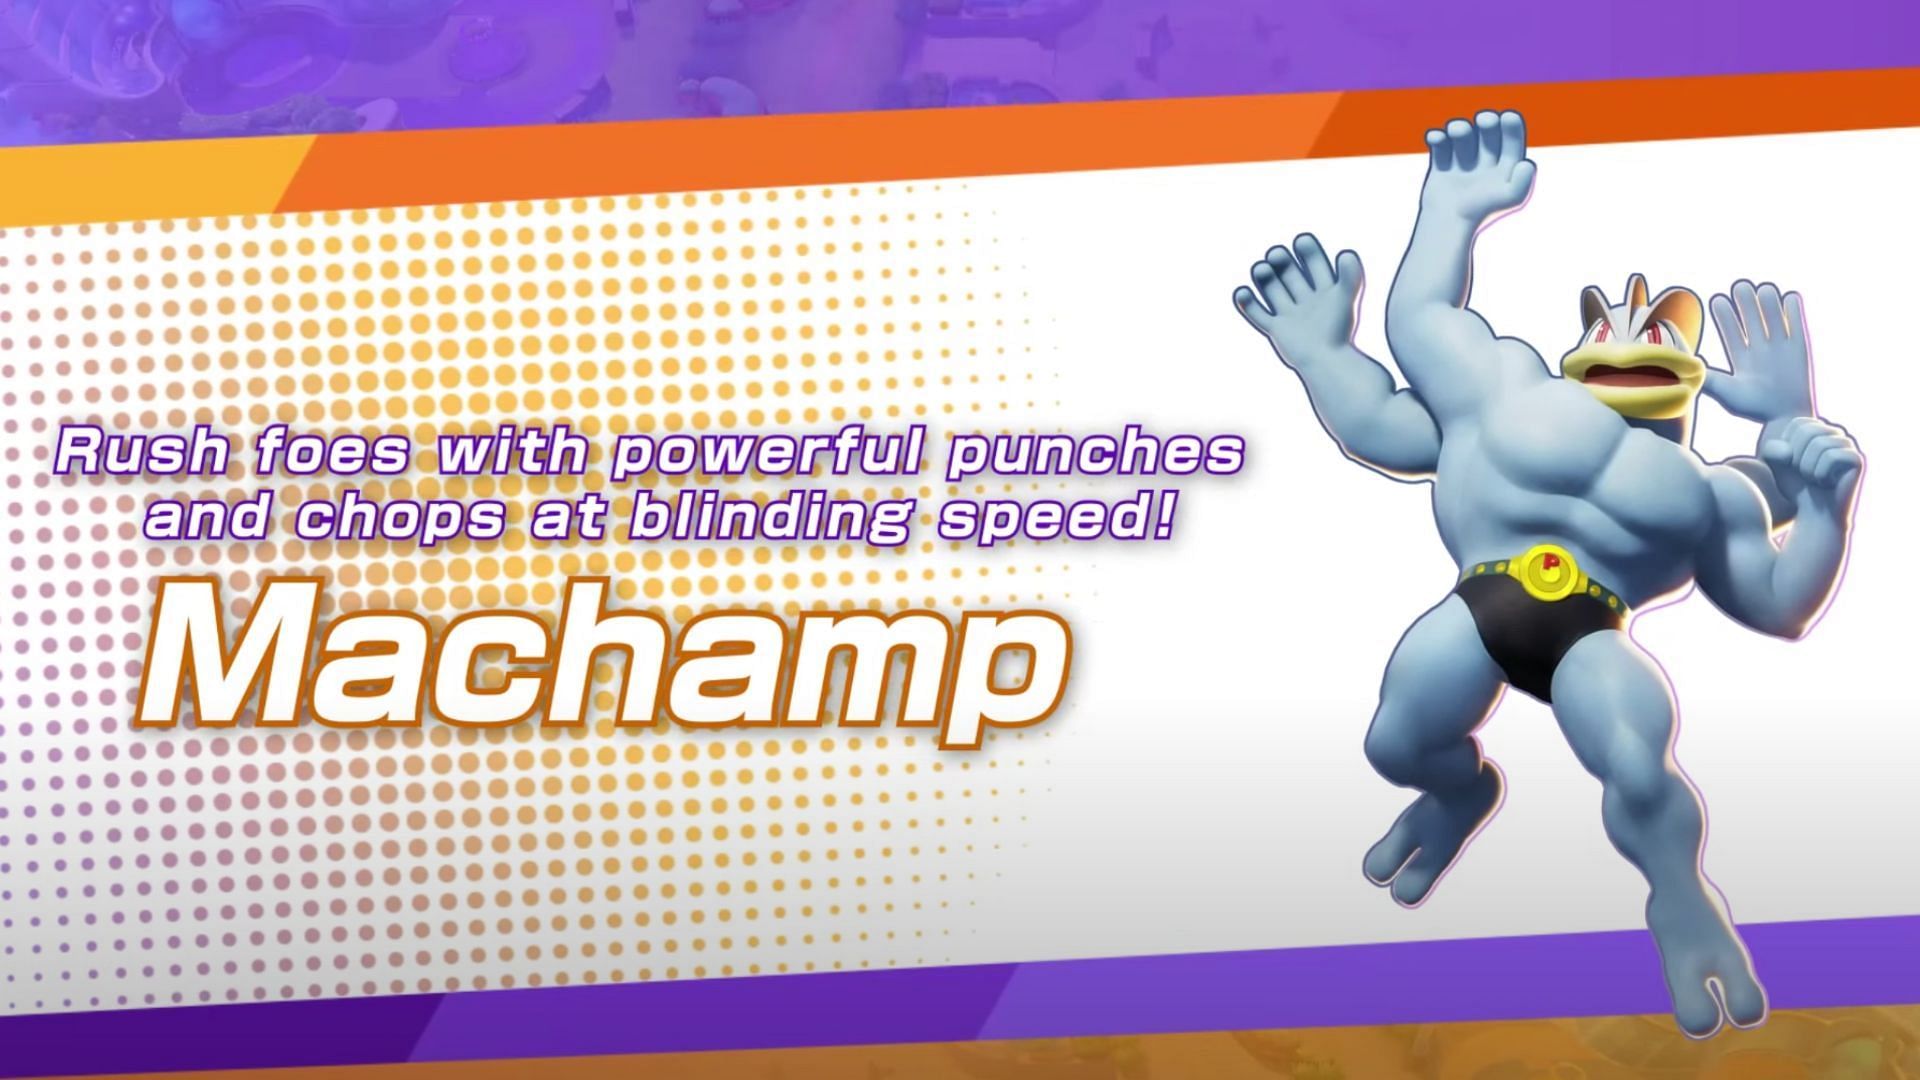 Official imagery for Machamp used for Pokemon Unite (Image via The Pokemon Company)